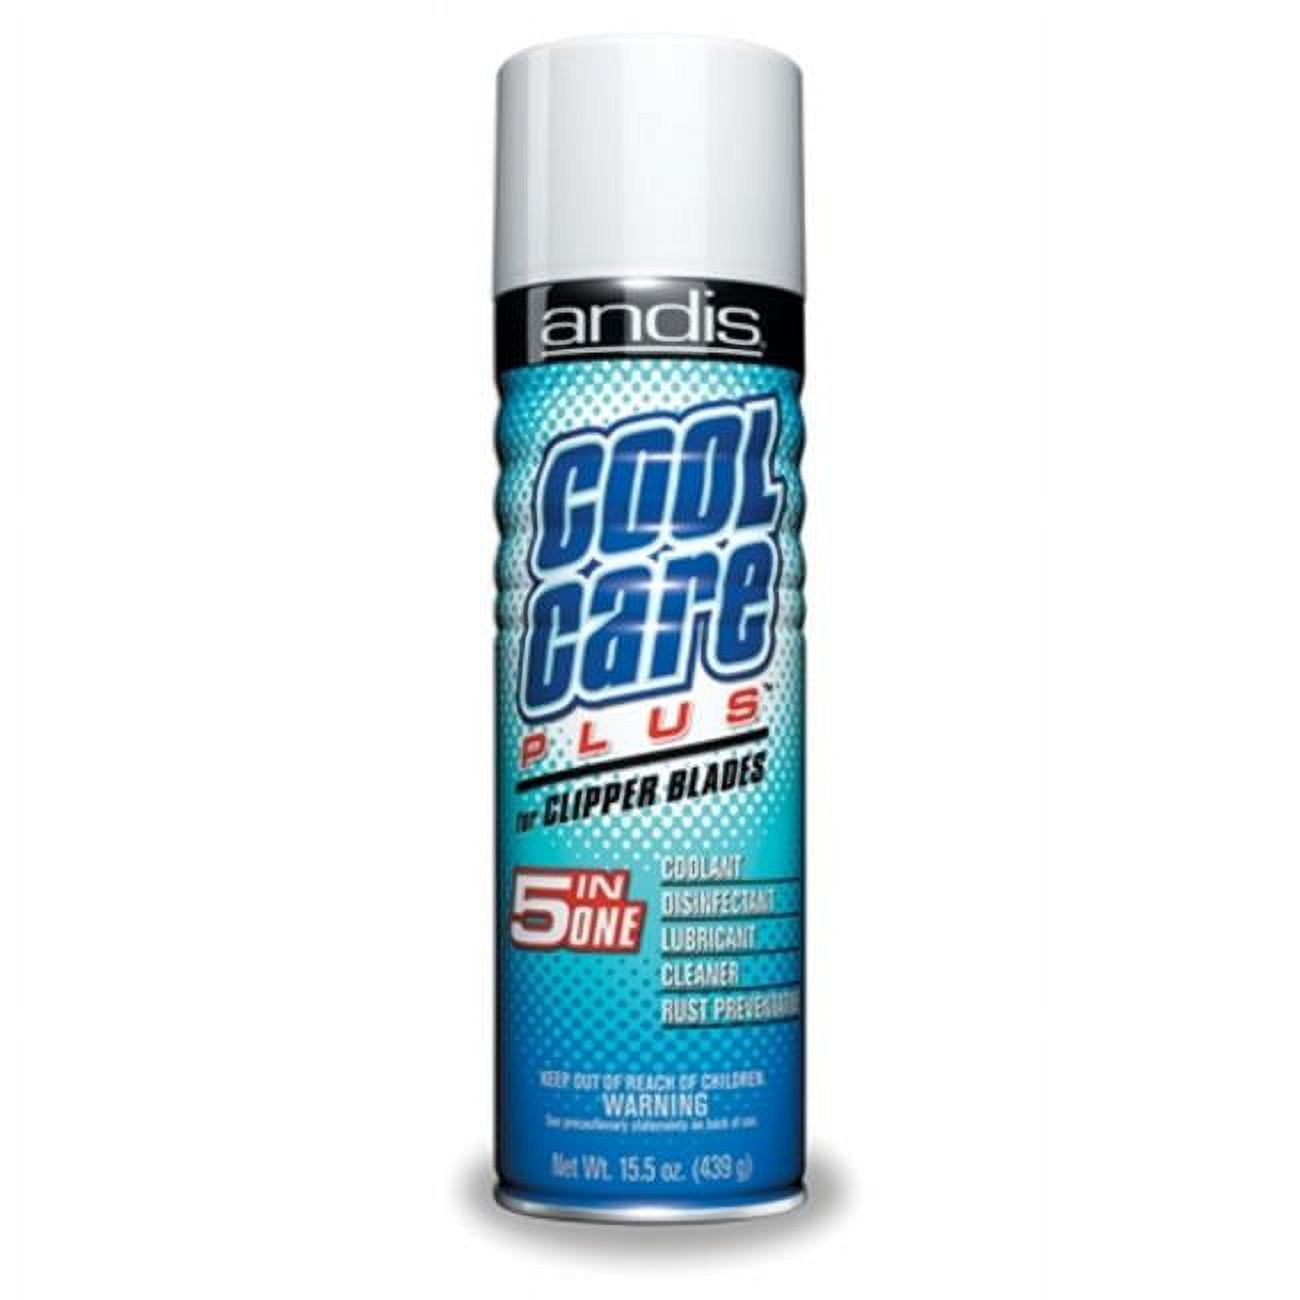 Andis Cool Care Plus n'1 Spray